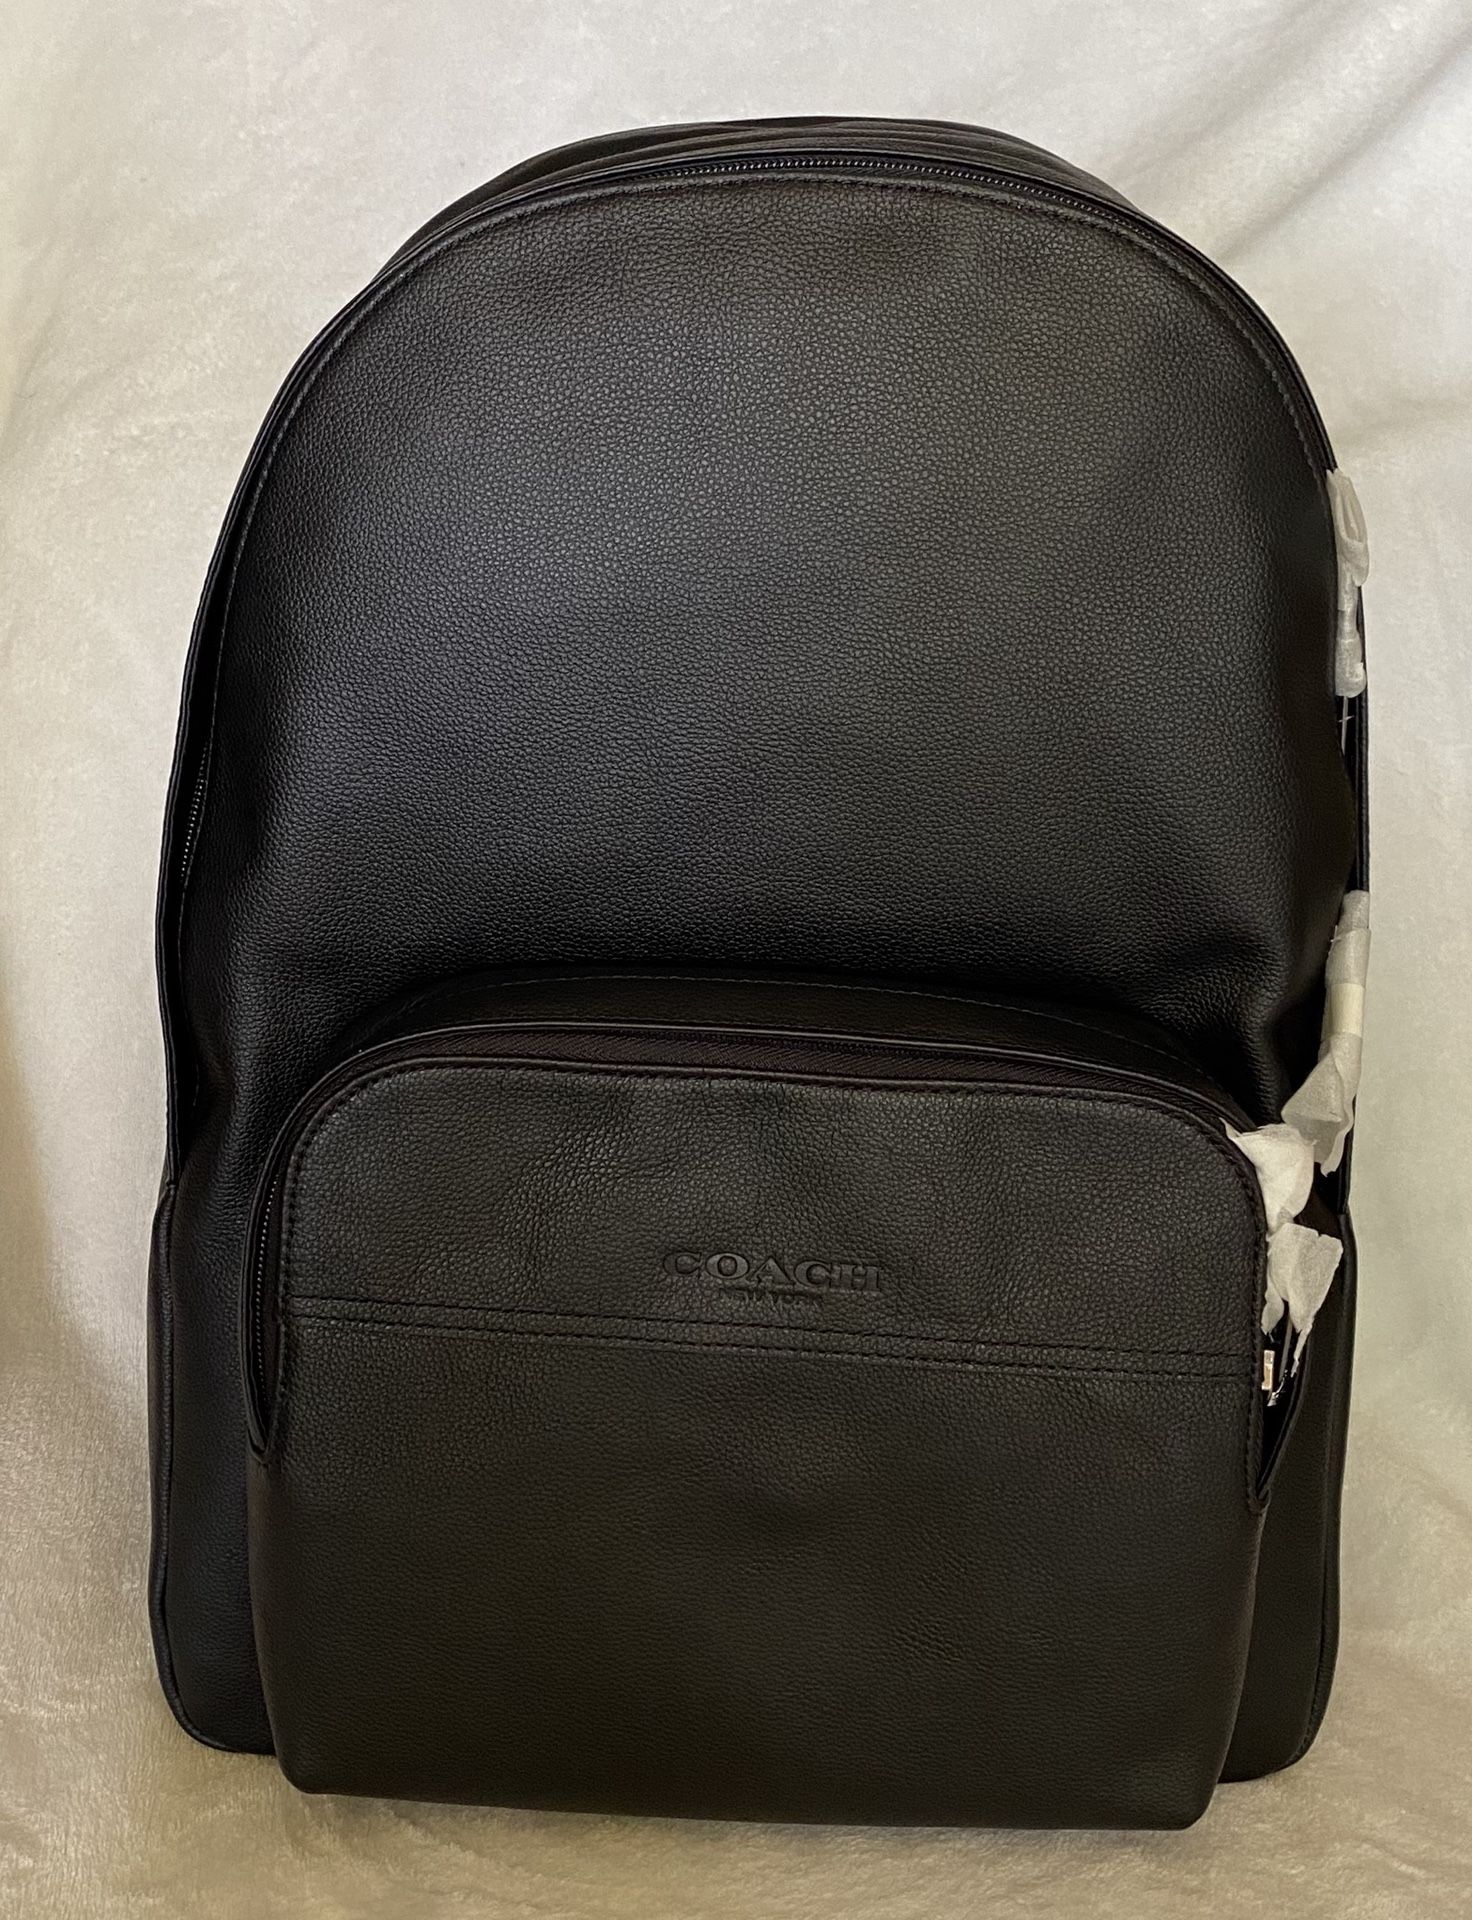 NWT AUTHENTIC Coach Mens Houston Black Leather Backpack